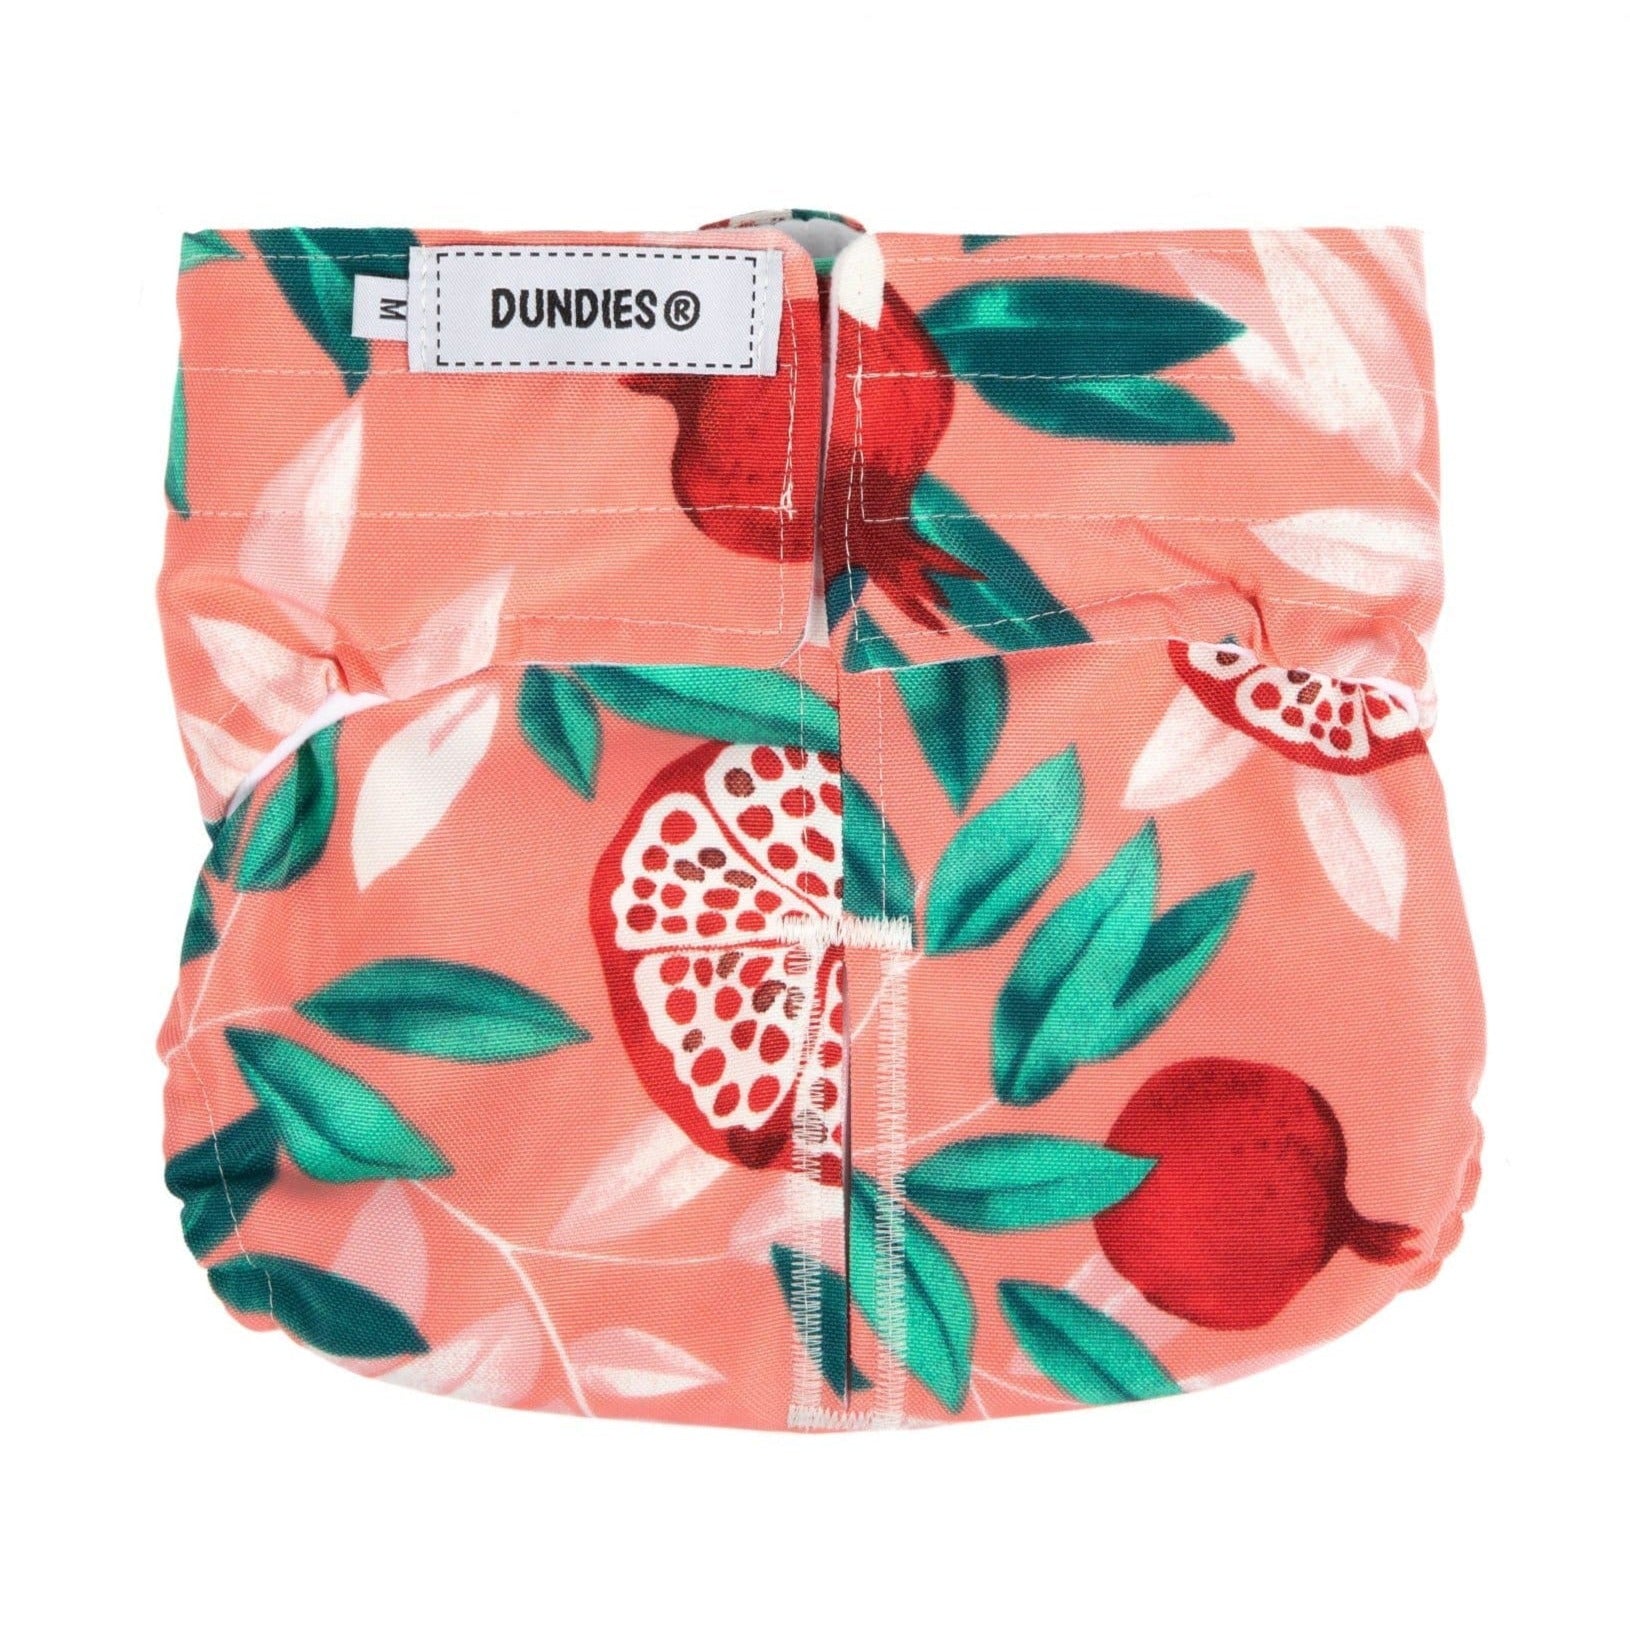 Dundies Pomegranate Snappie-Dundies Australia - Vet Recommended Pet Nappies